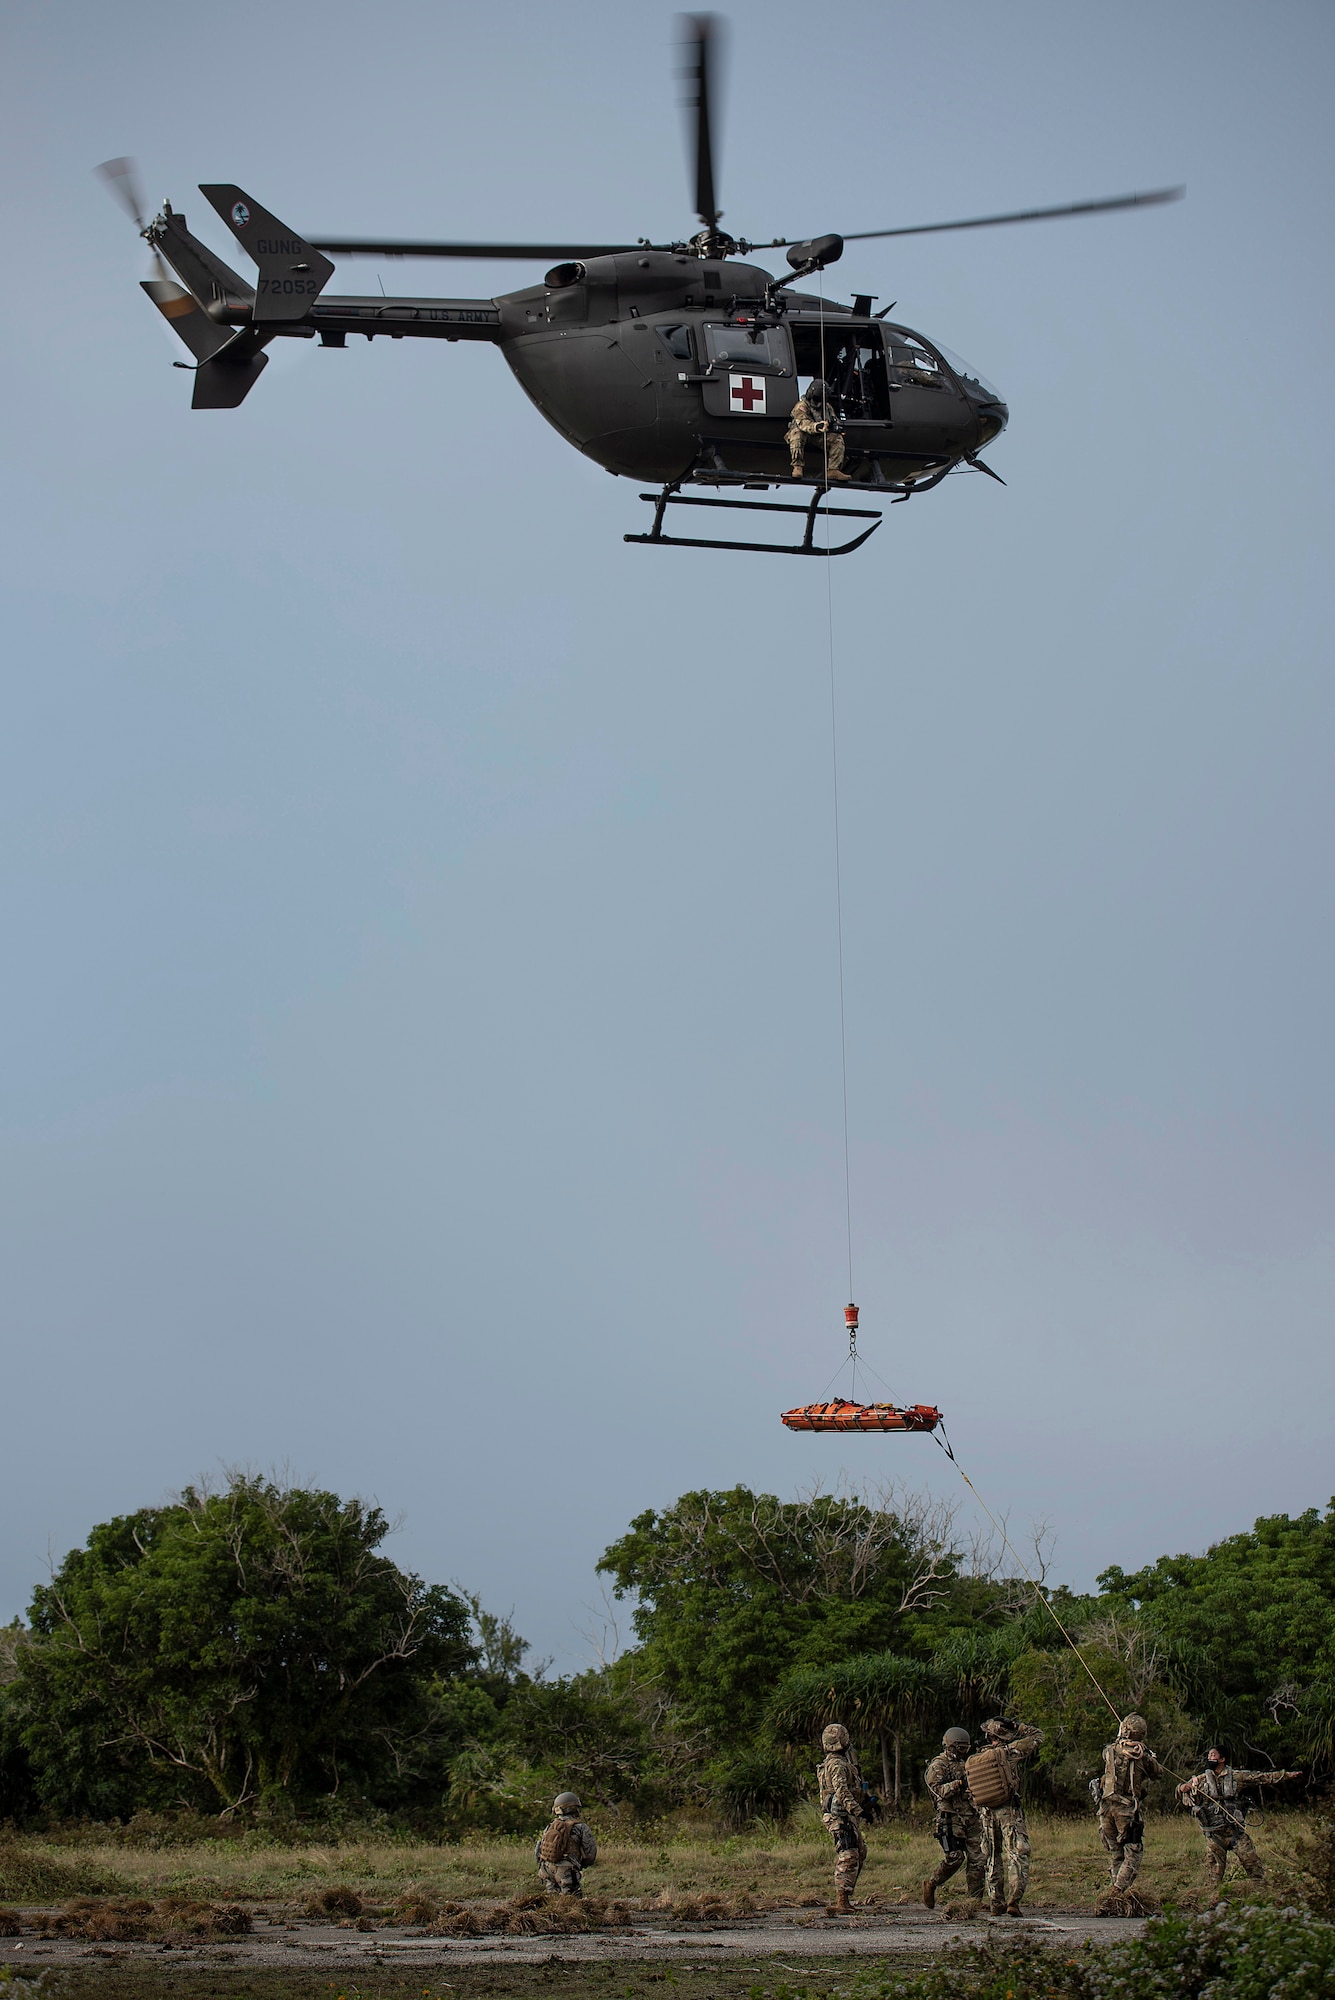 Multi-capable Airmen of the 644th Combat Communications Squadron run the trail line of the stretcher as it’s hoisted in to the Guam Army National Gaurd medical helicopter, as training, during Exercise Dragon Shield at Northwest Field, Guam, January 13, 2021.